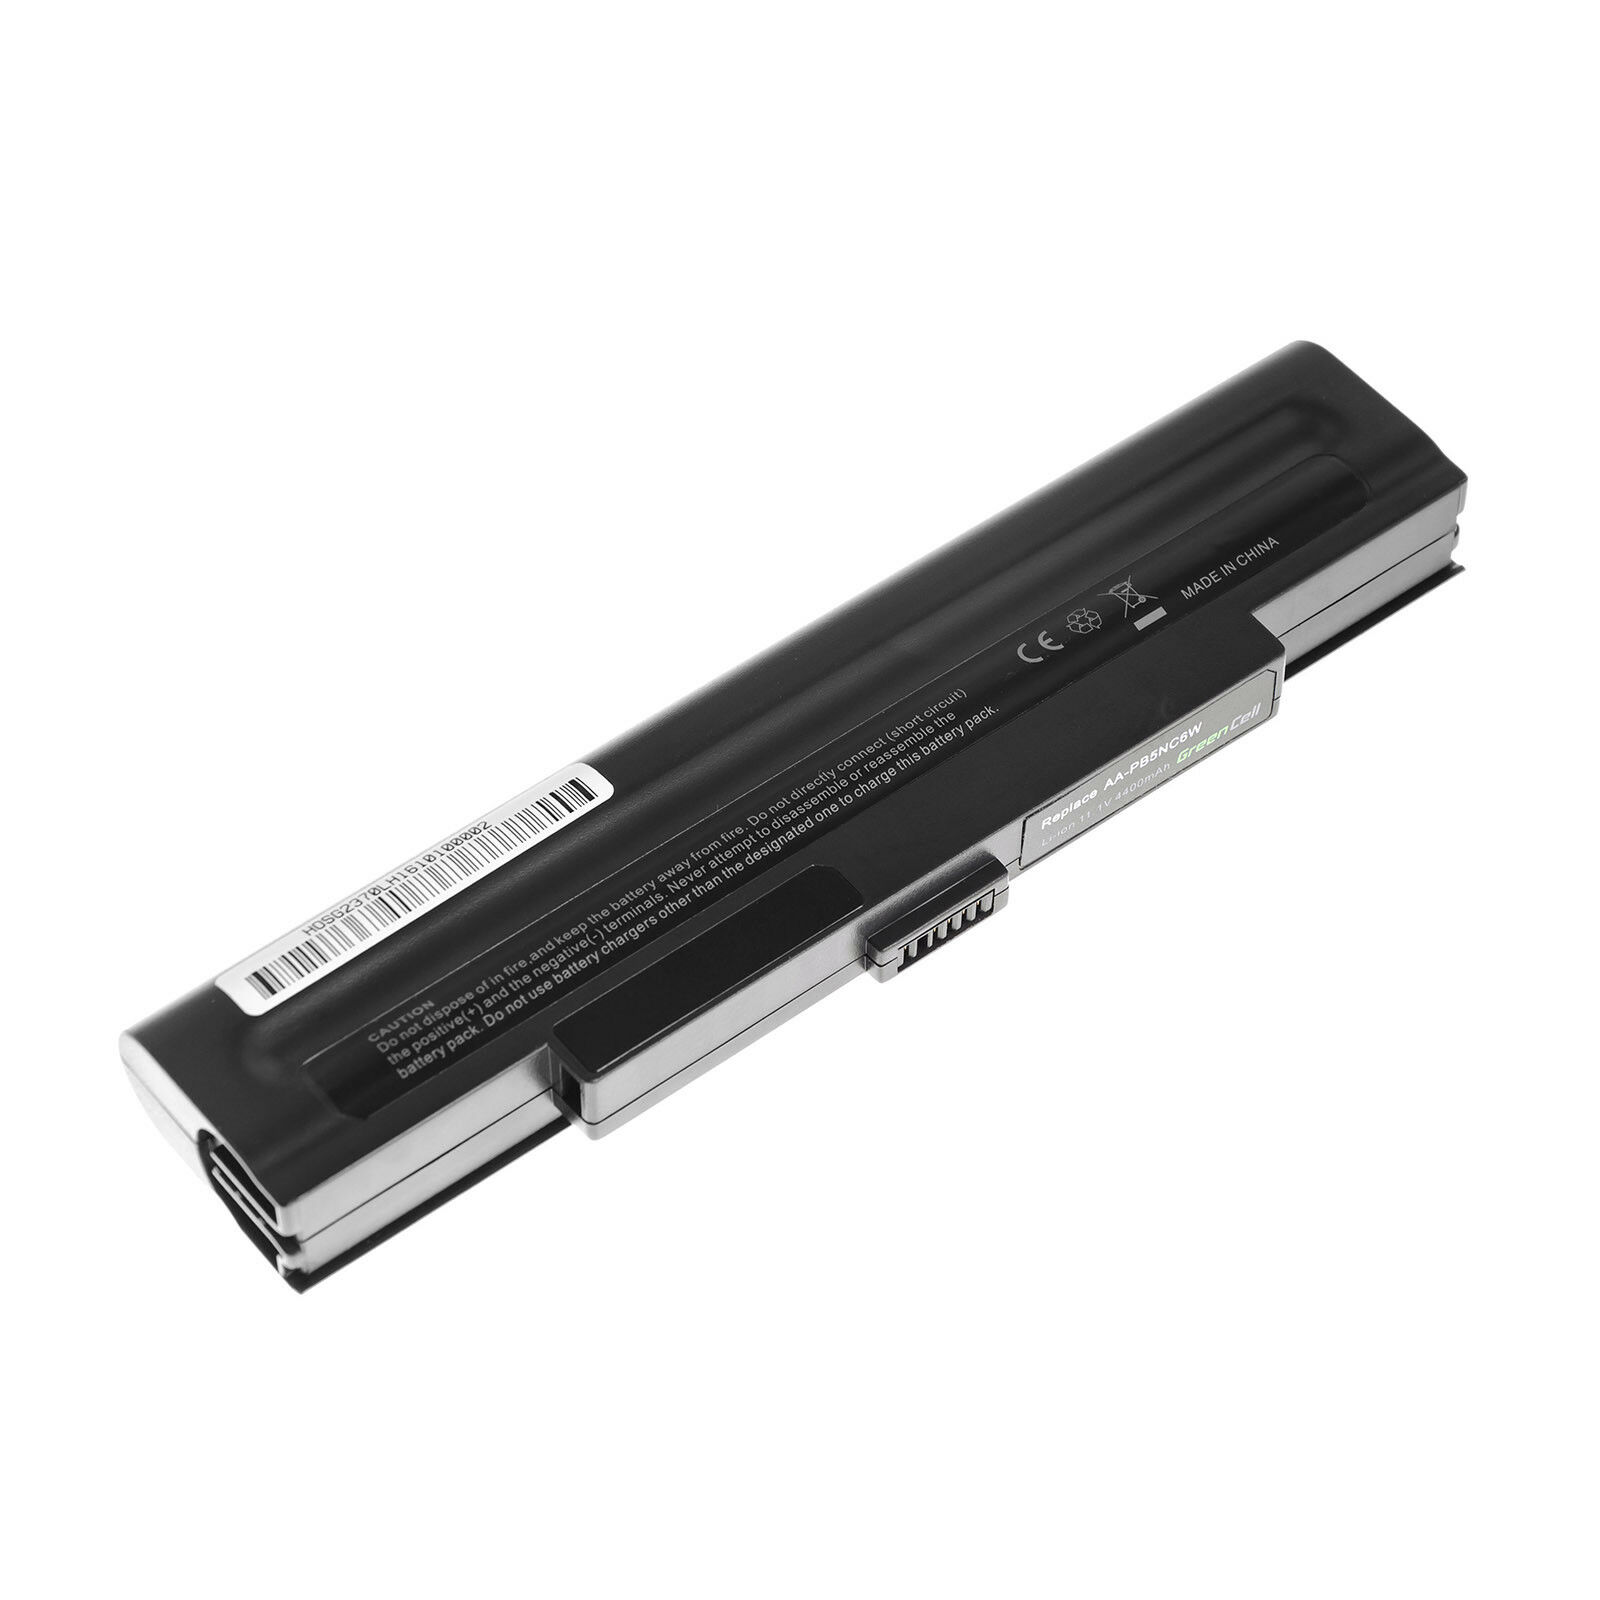 SAMSUNG Q35-T5500 Ruby compatible battery